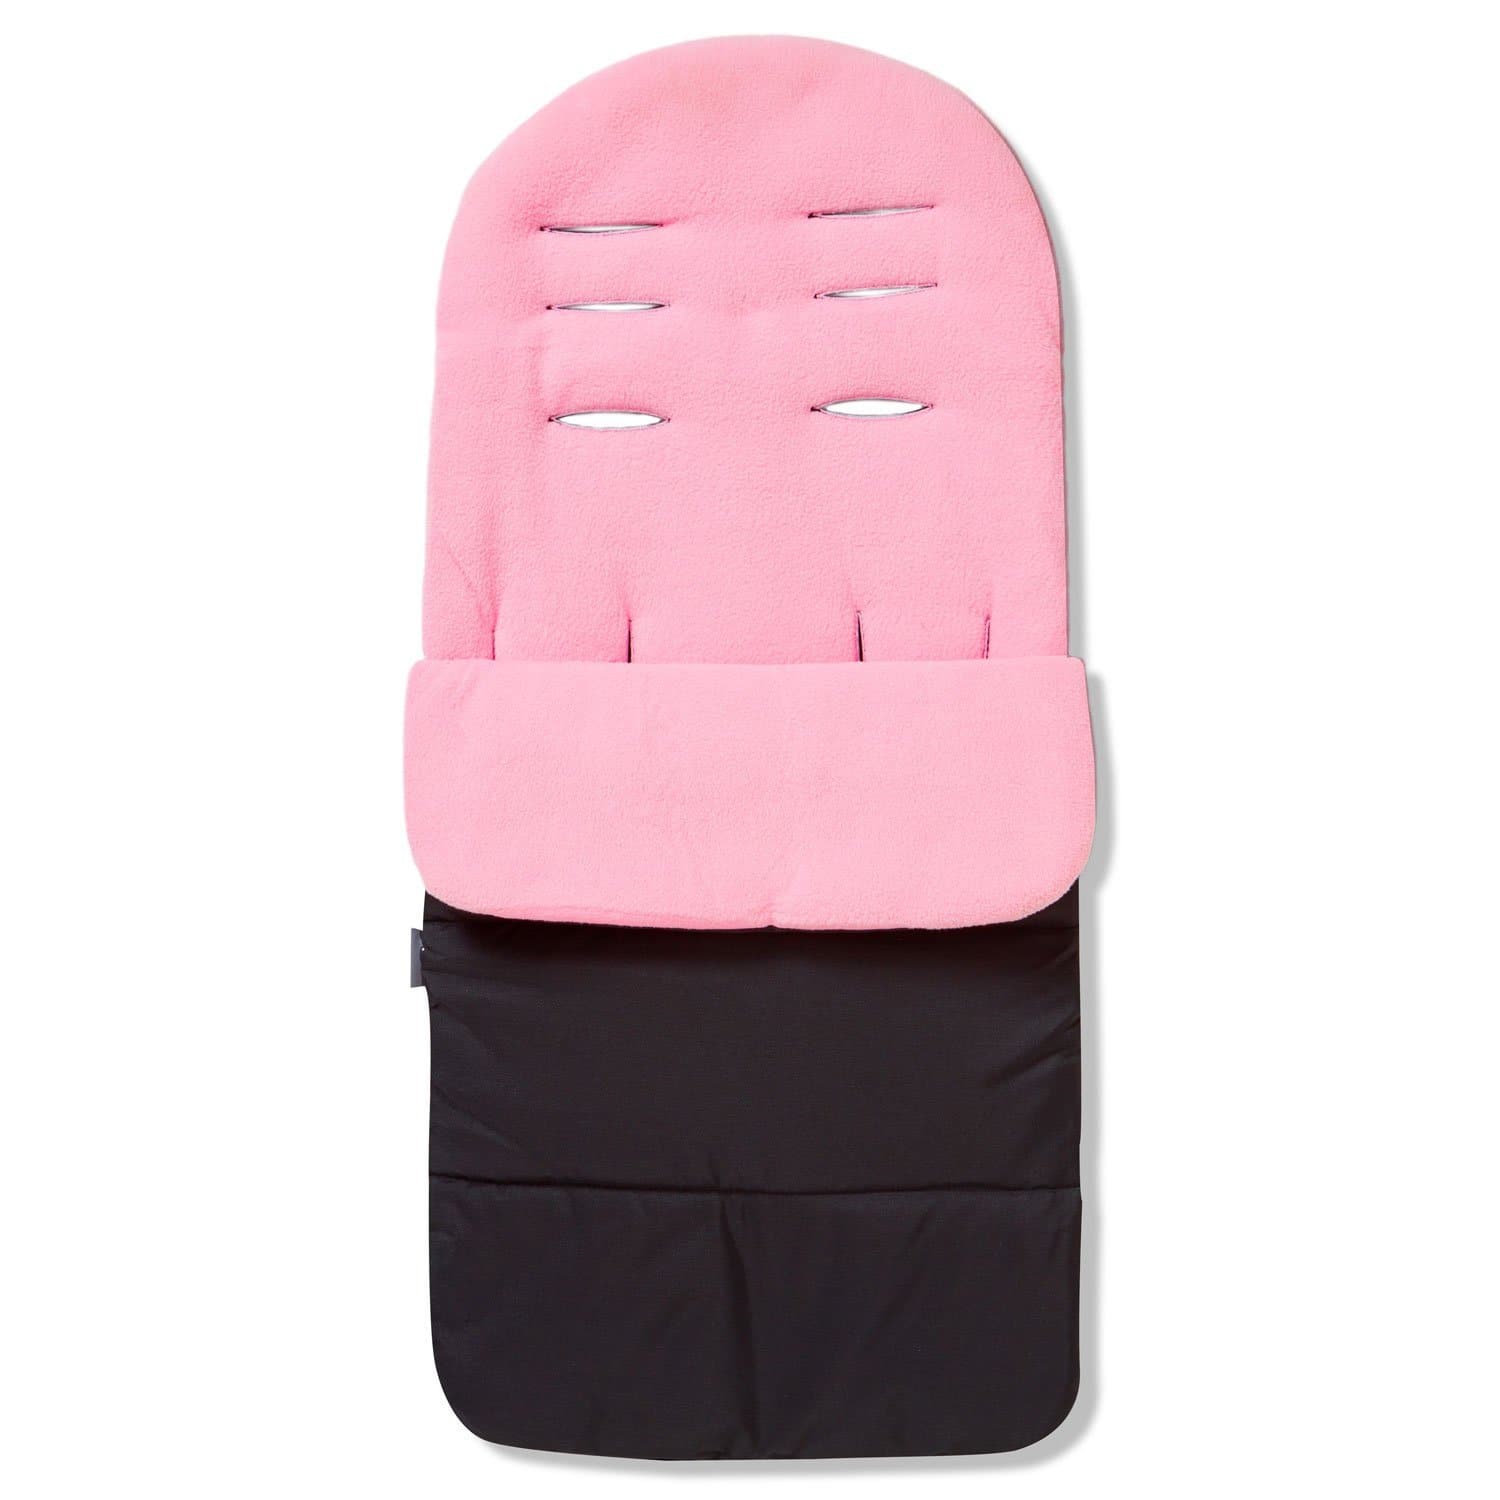 Premium Footmuff / Cosy Toes Compatible with Baby Trend - Candy Pink / Fits All Models | For Your Little One